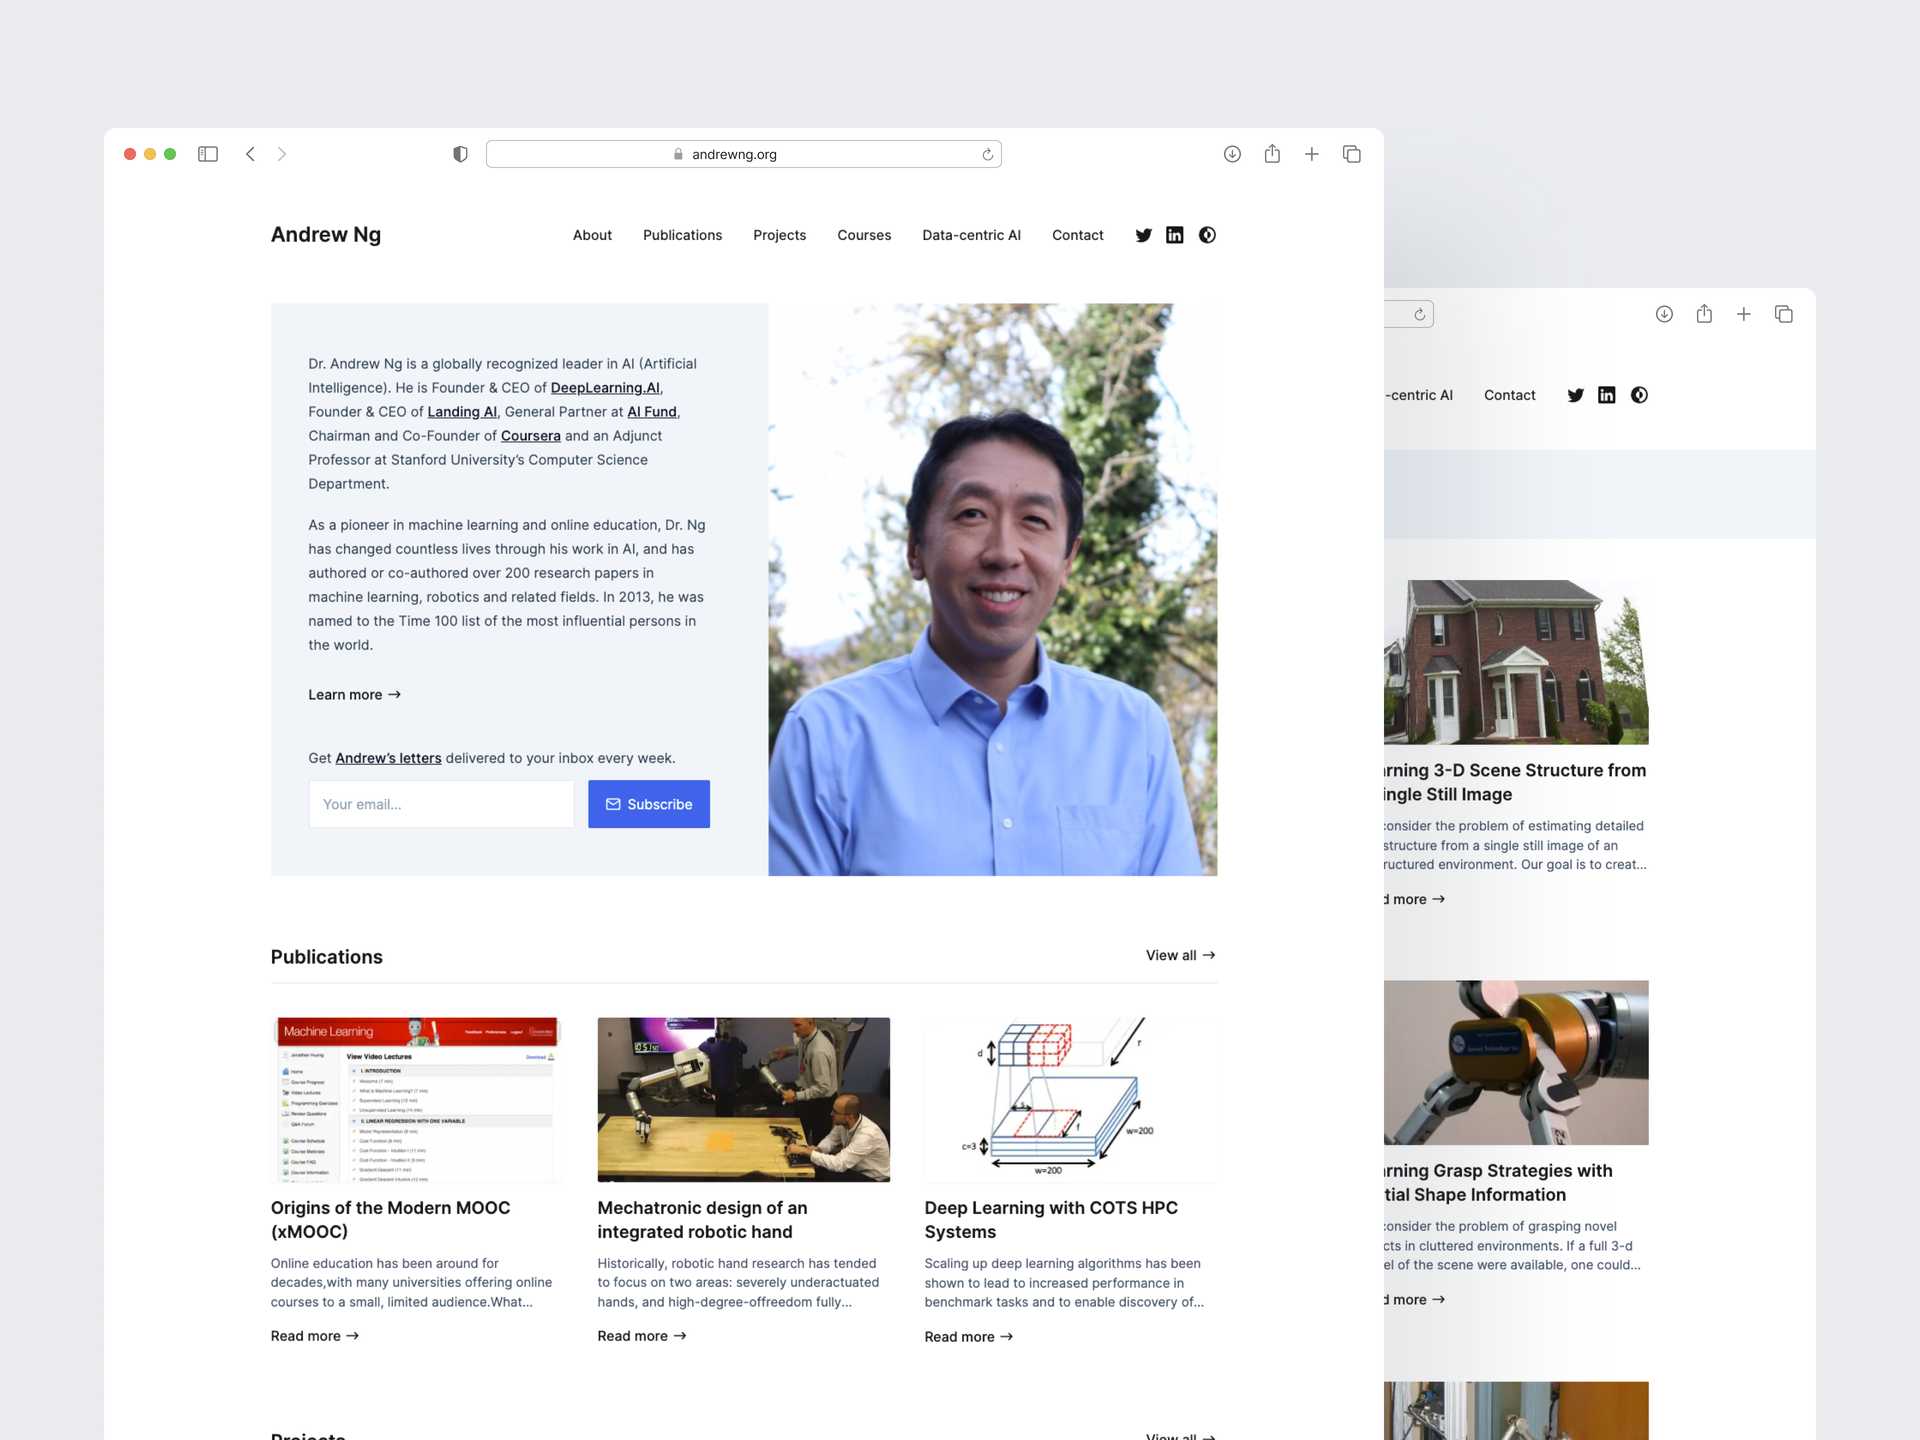 Mockups of Andrew Ng's website